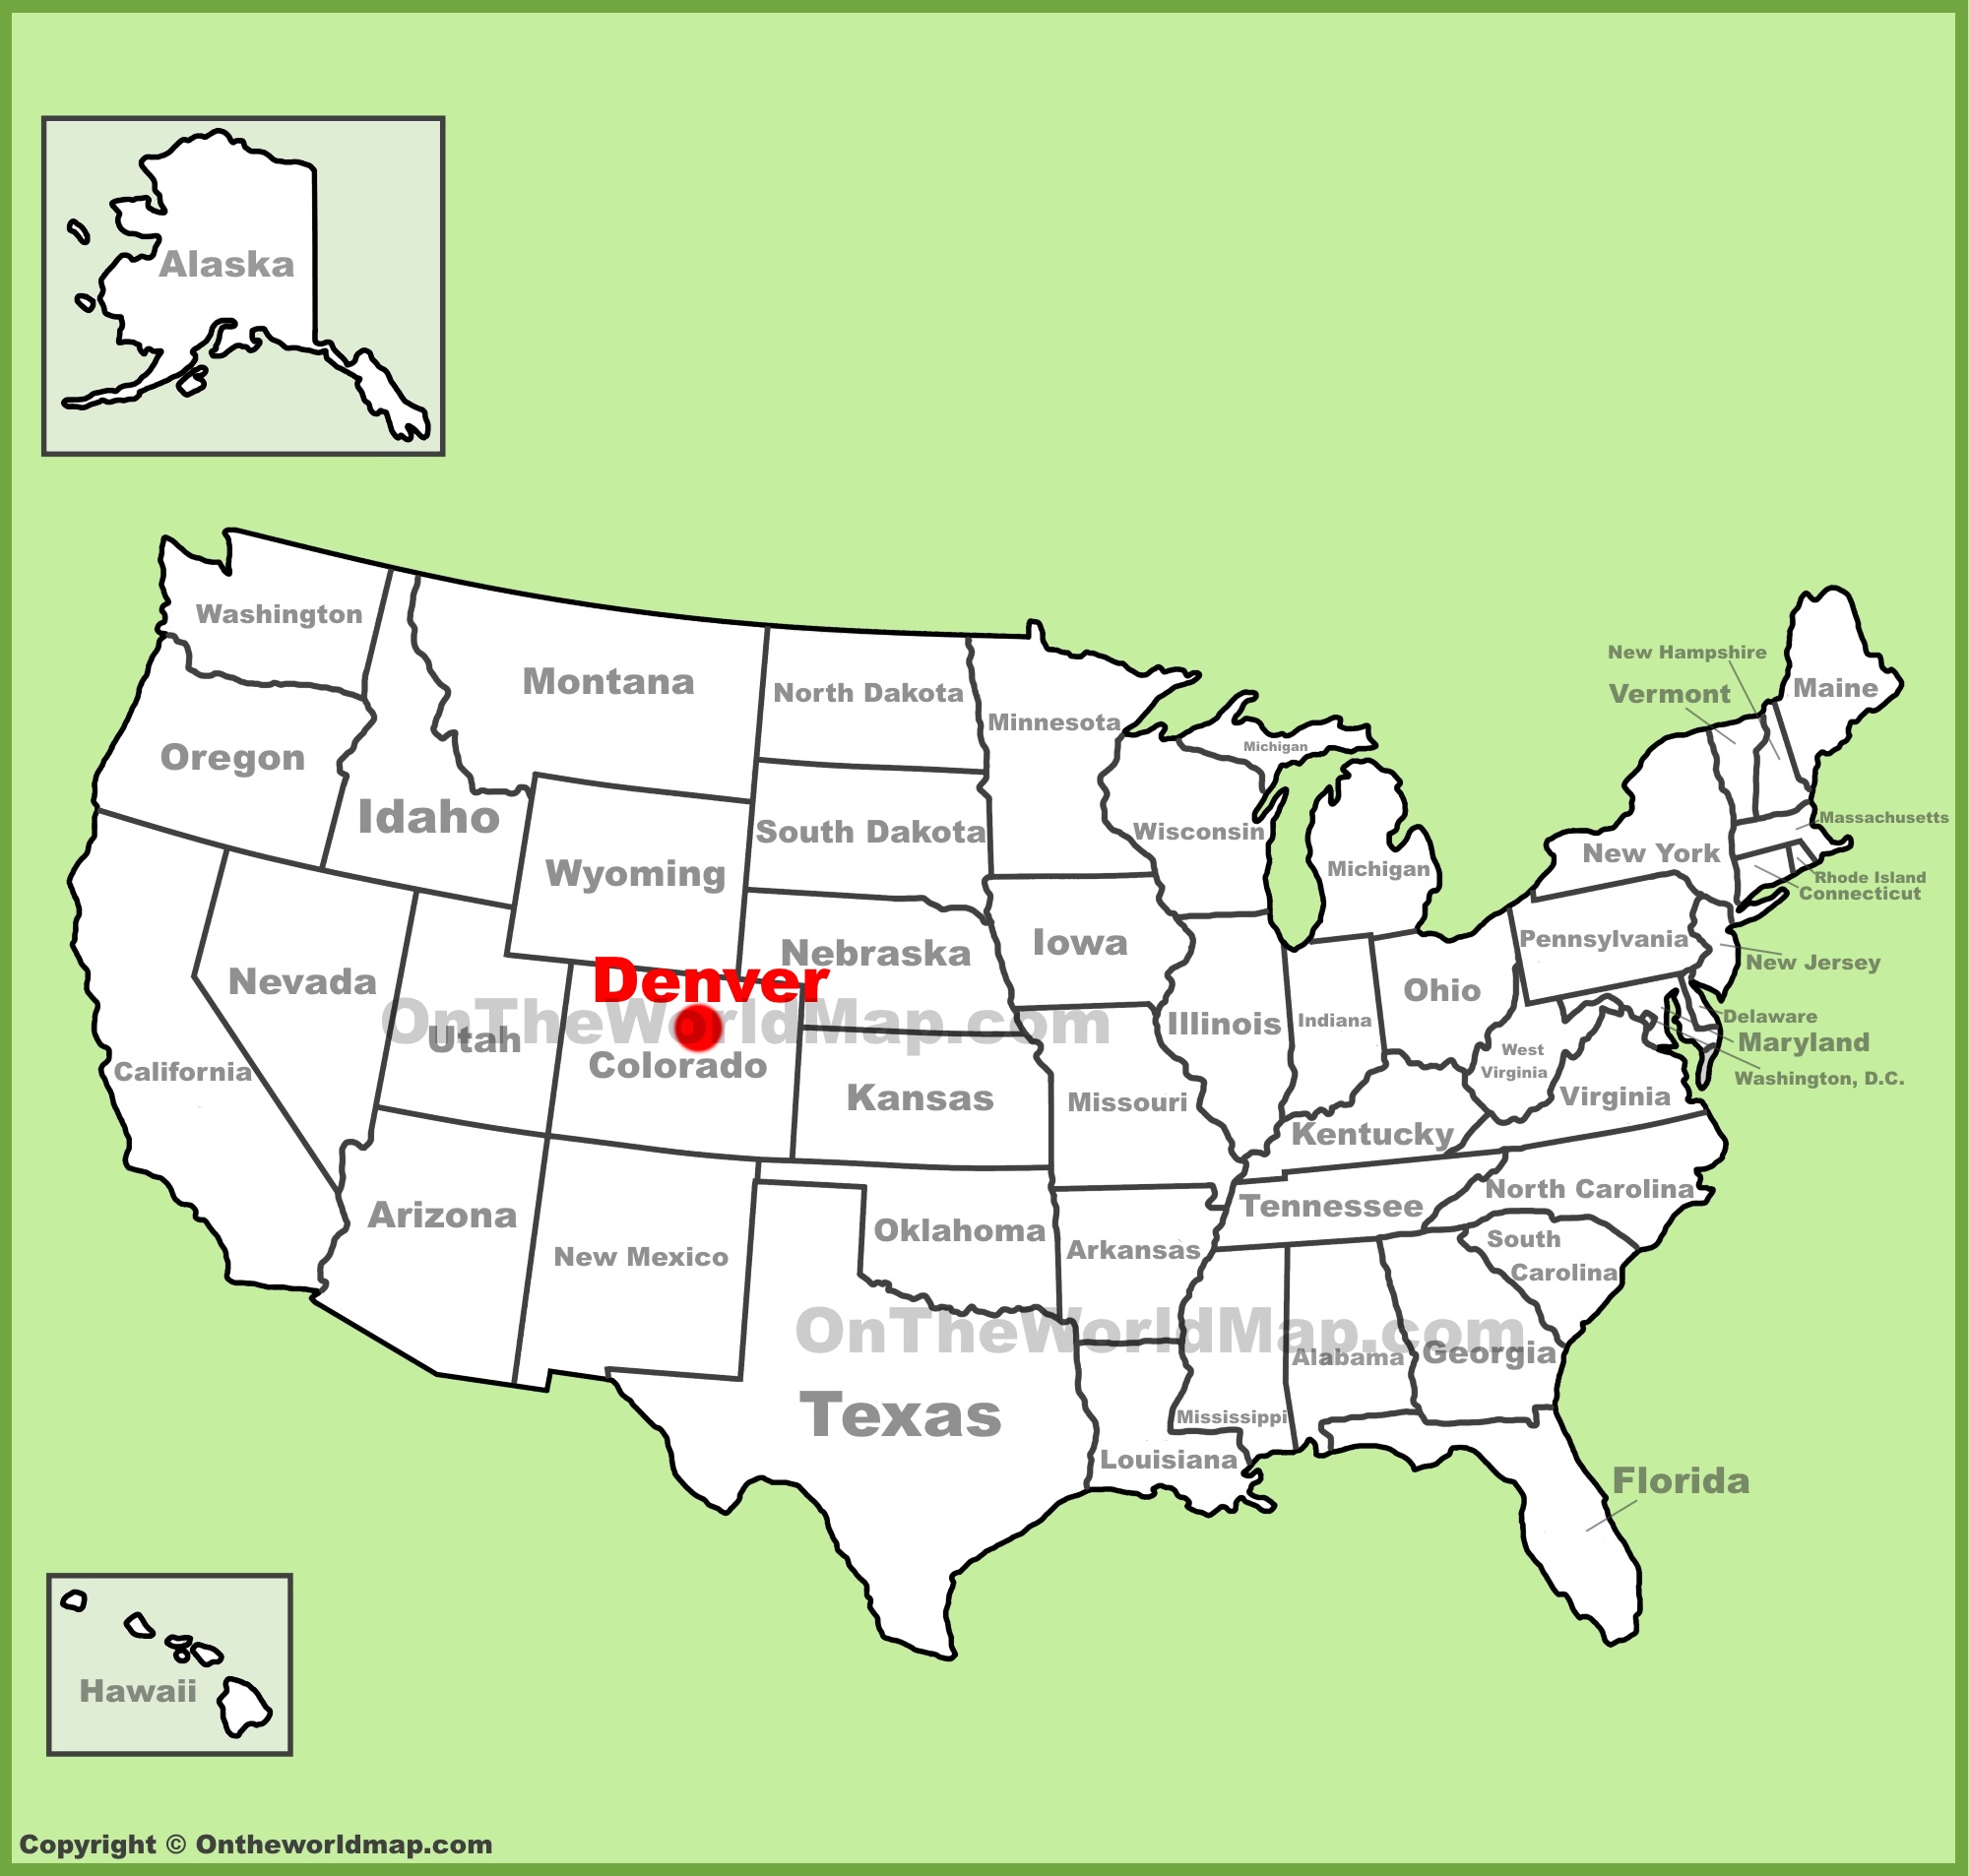 Denver Location On The Us Map 